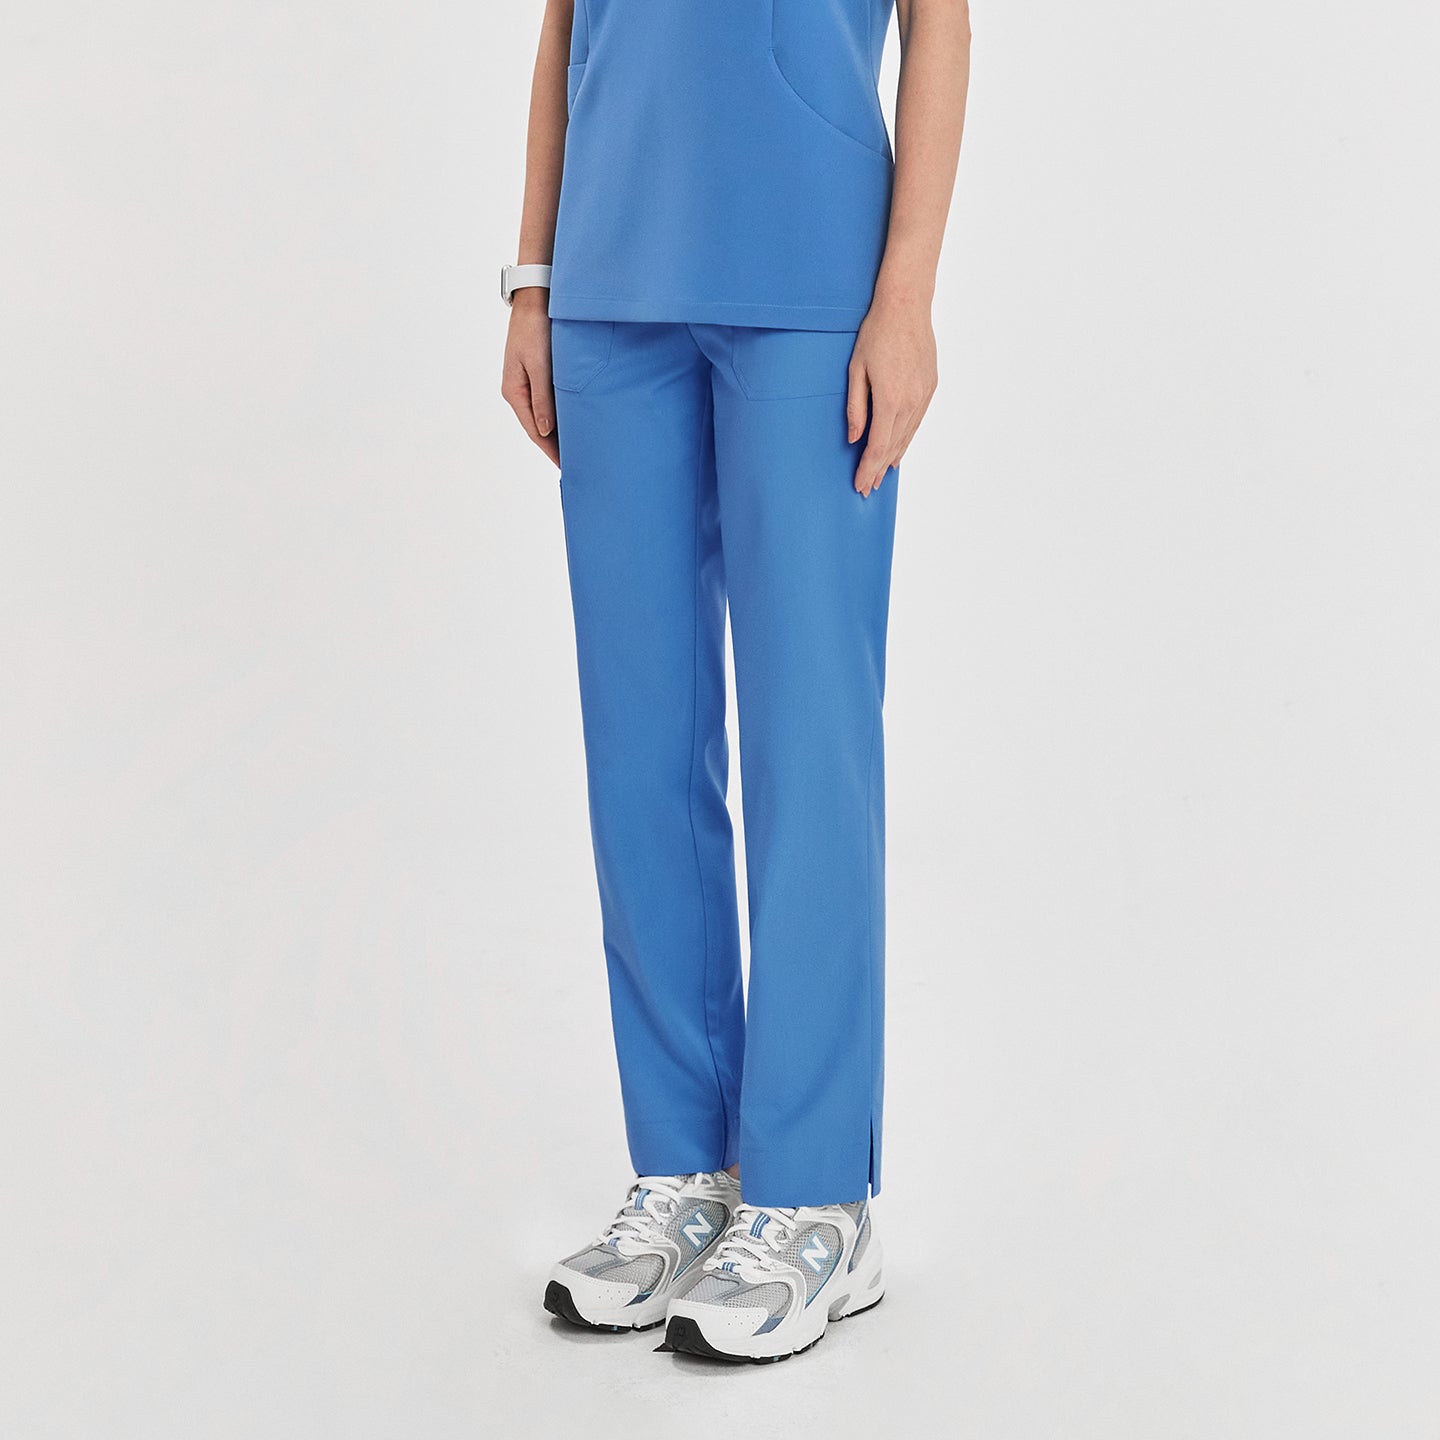 Woman in sky blue zipper slit scrub pants with a side pocket, shown from the front with a matching scrub top,Sky Blue